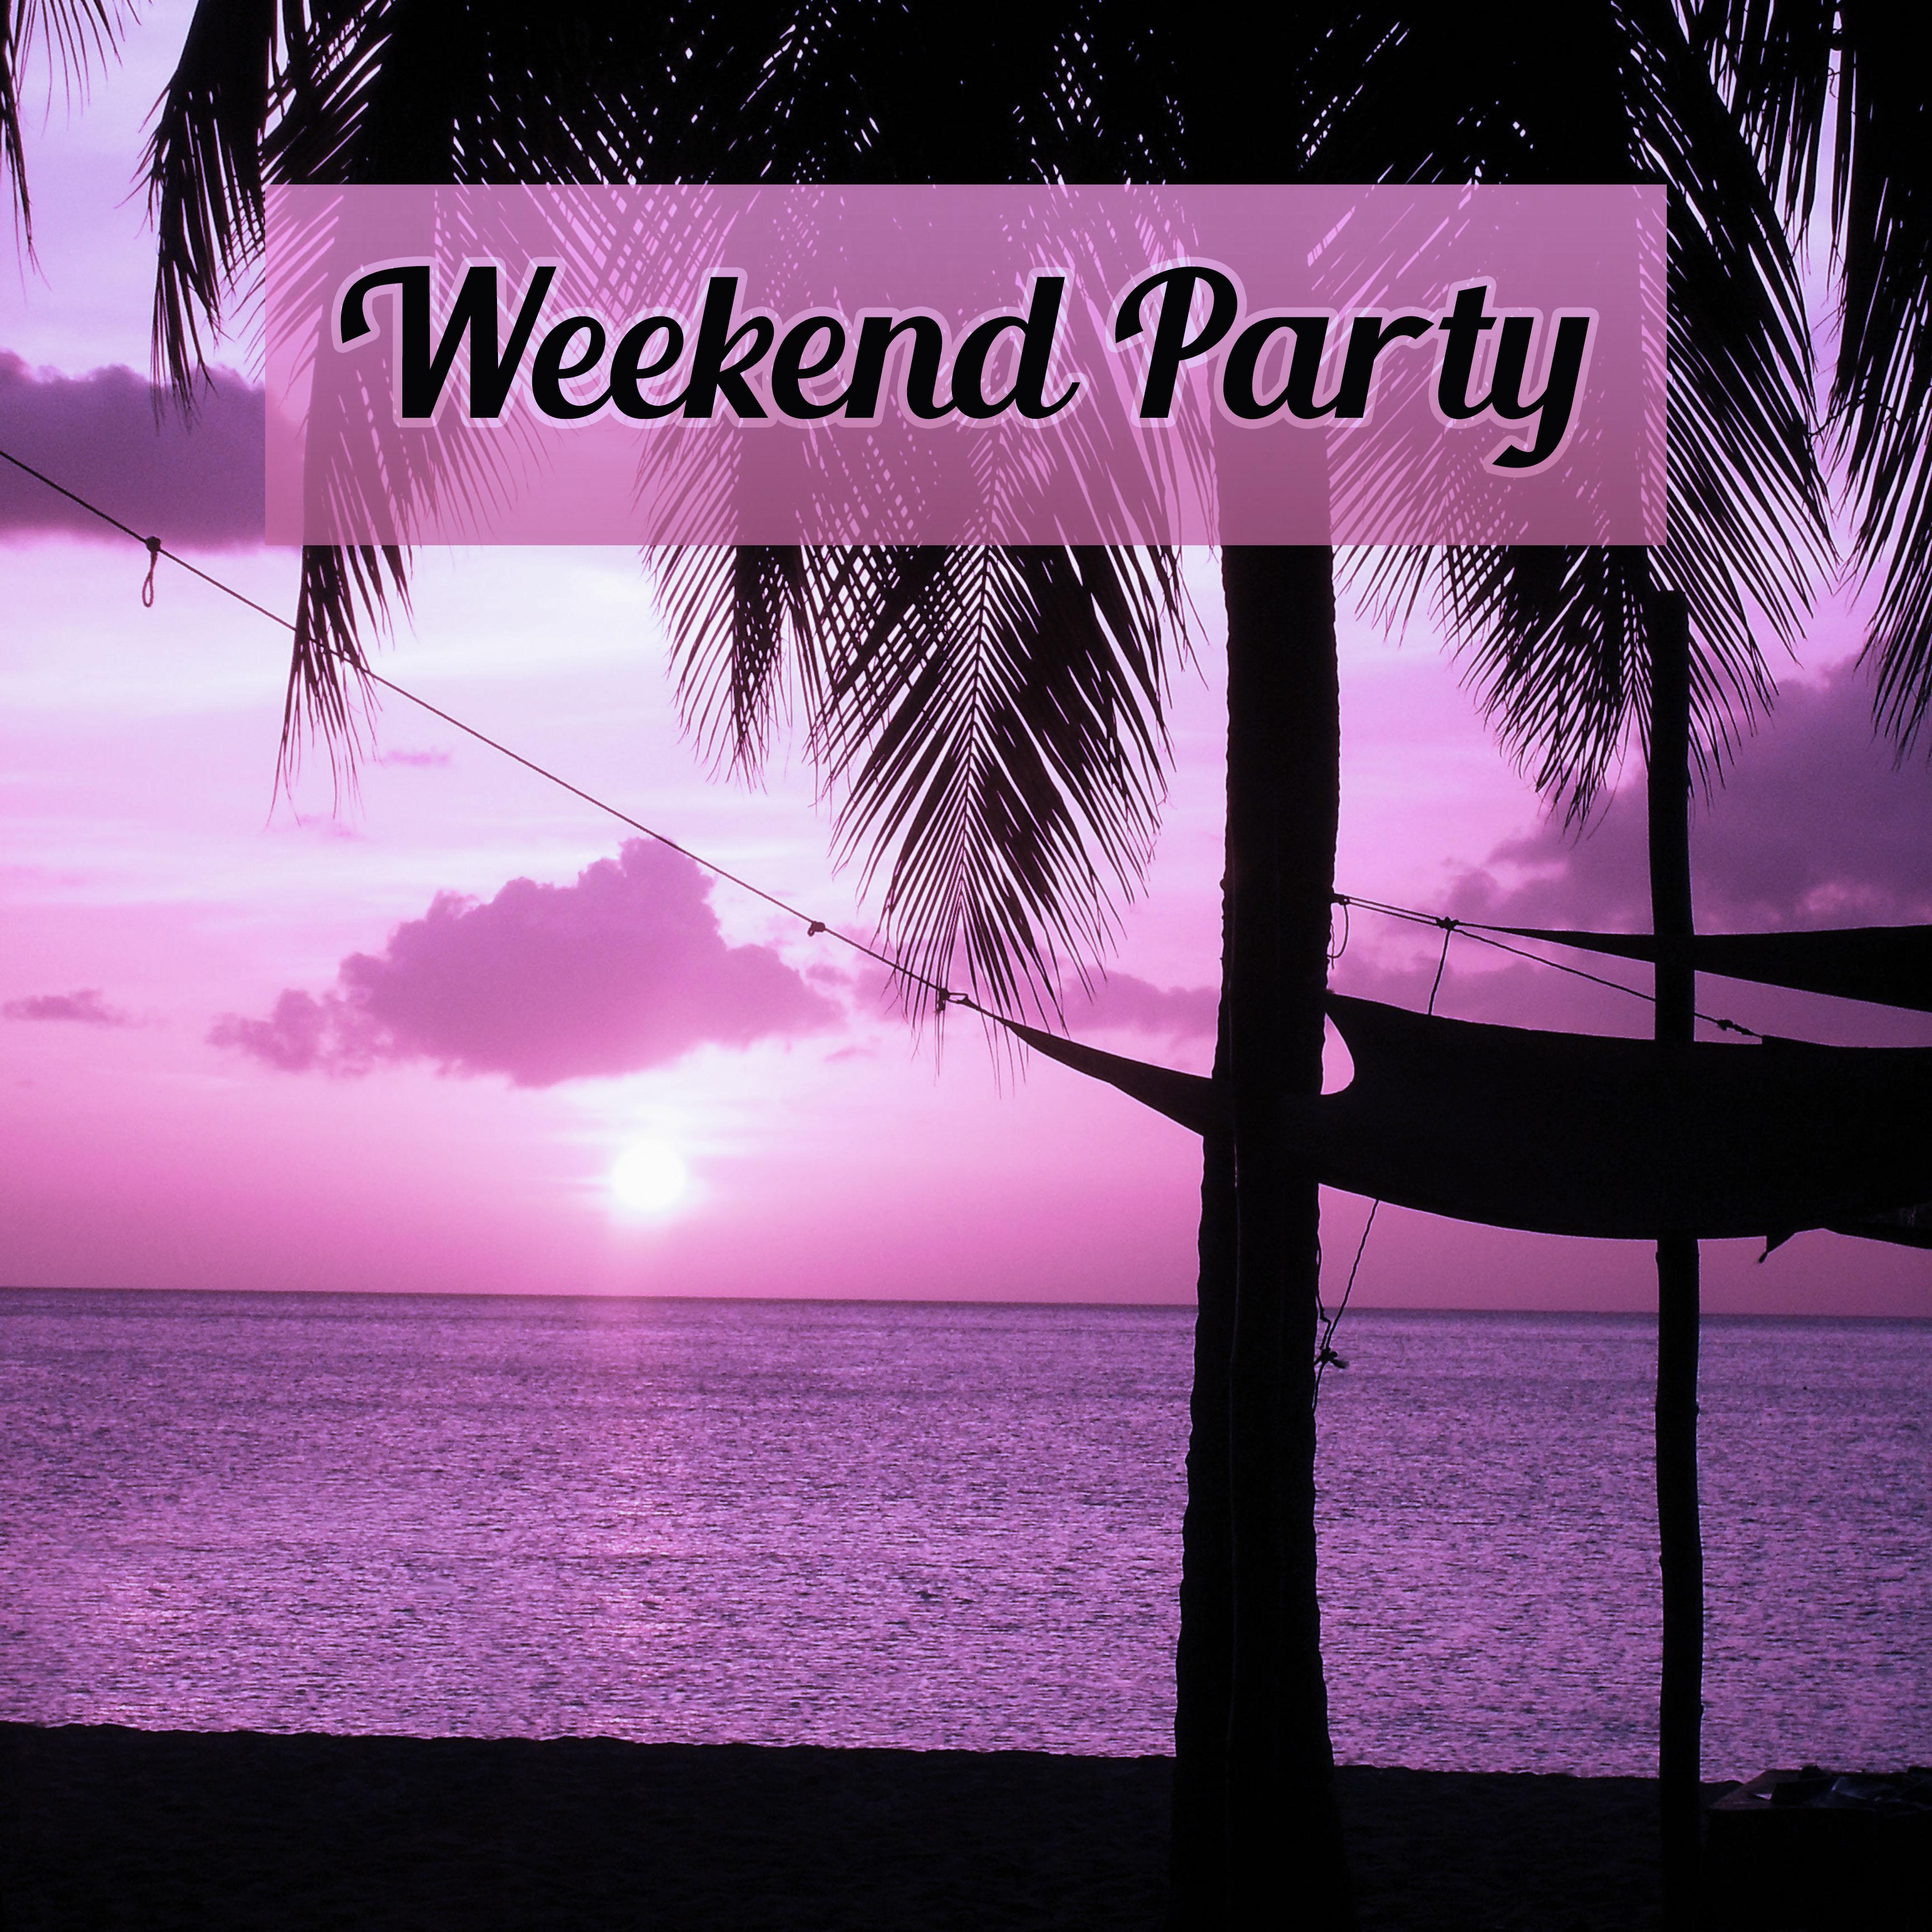 Weekend Party - Ambient Paradise Music, Beach Party, Mellow Music